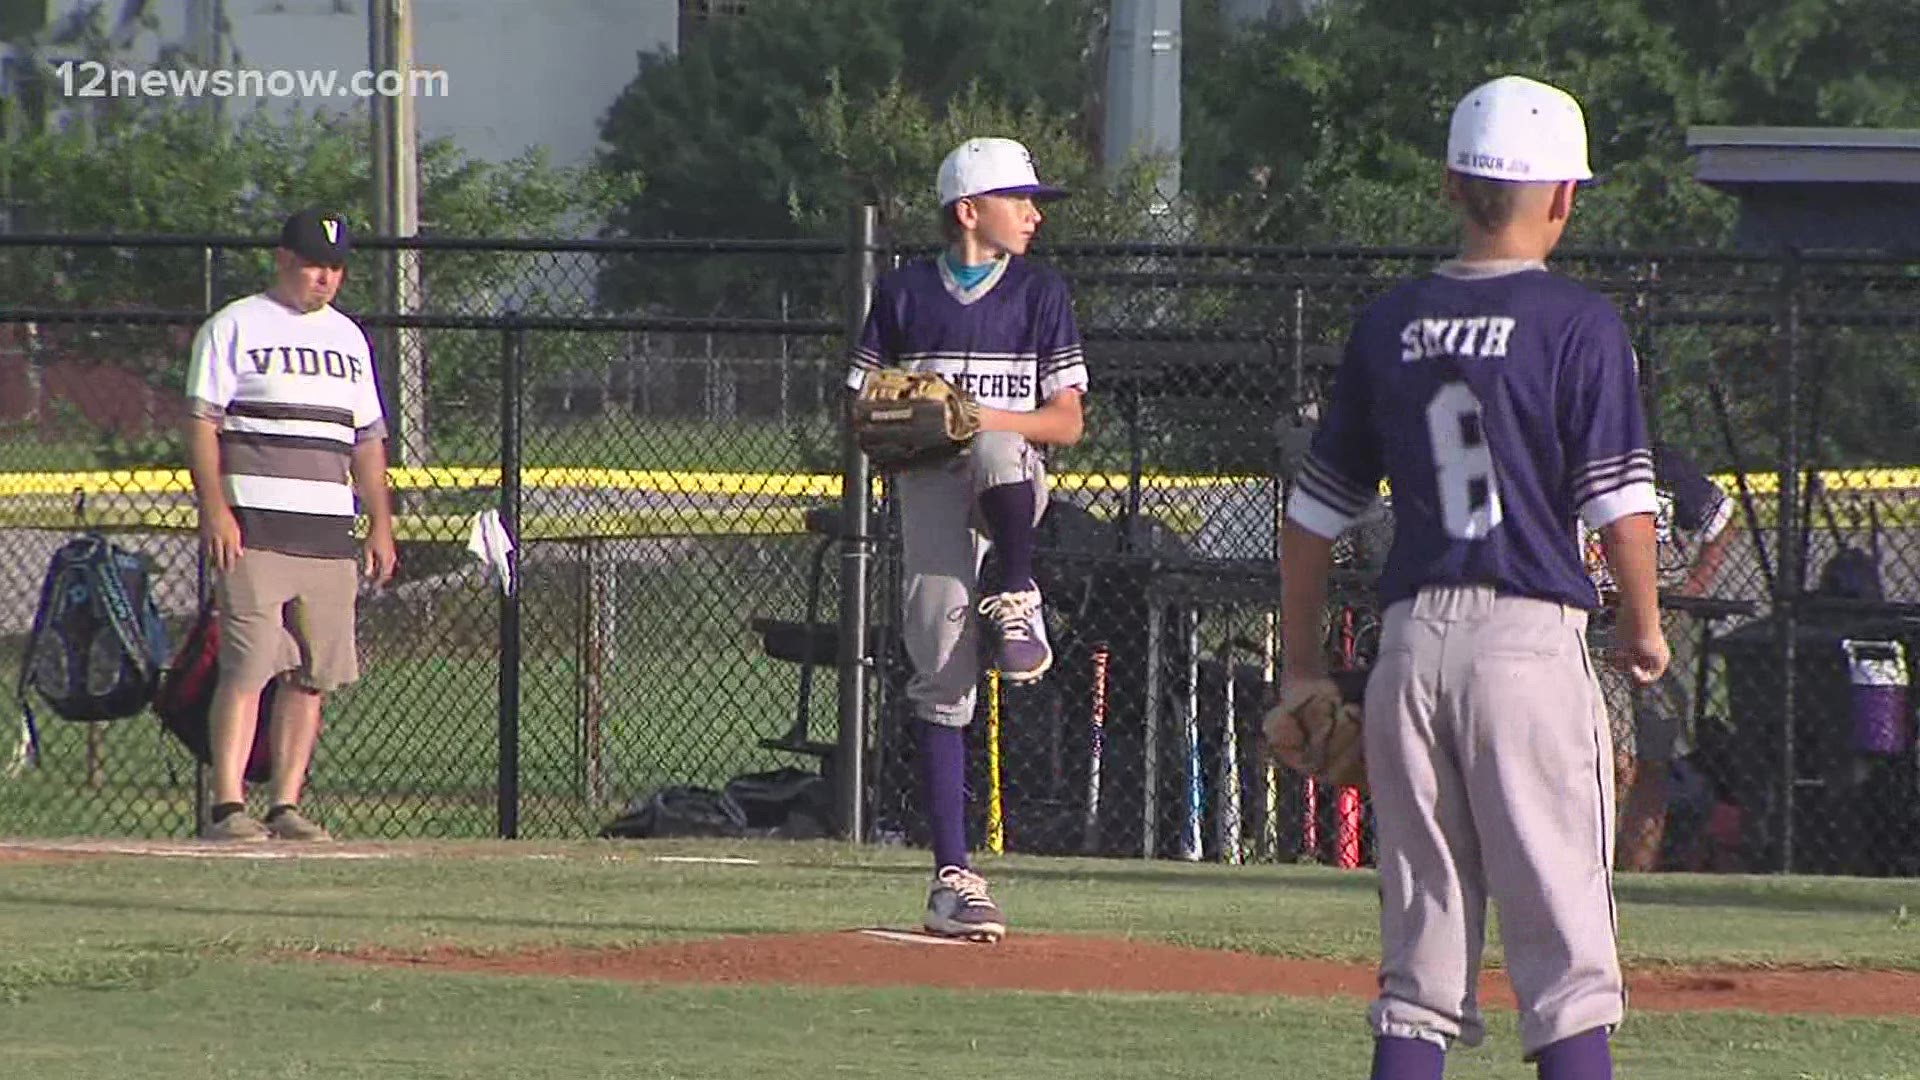 Port Neches pitchers combine for no-hitter in 11-0 win over Vidor